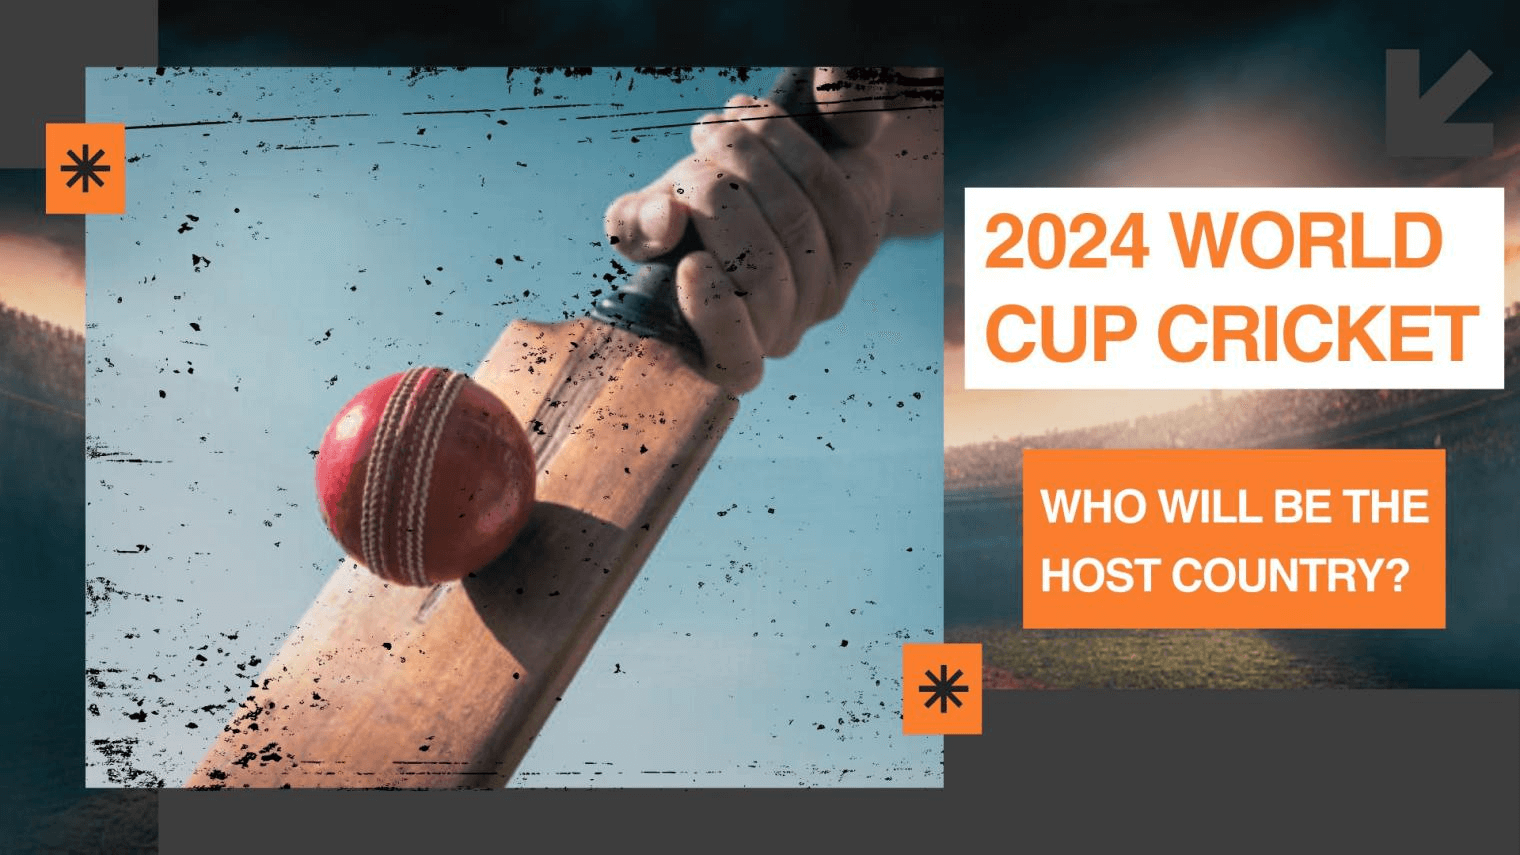 2024 World Cup Cricket Who Will Be the Host Country?